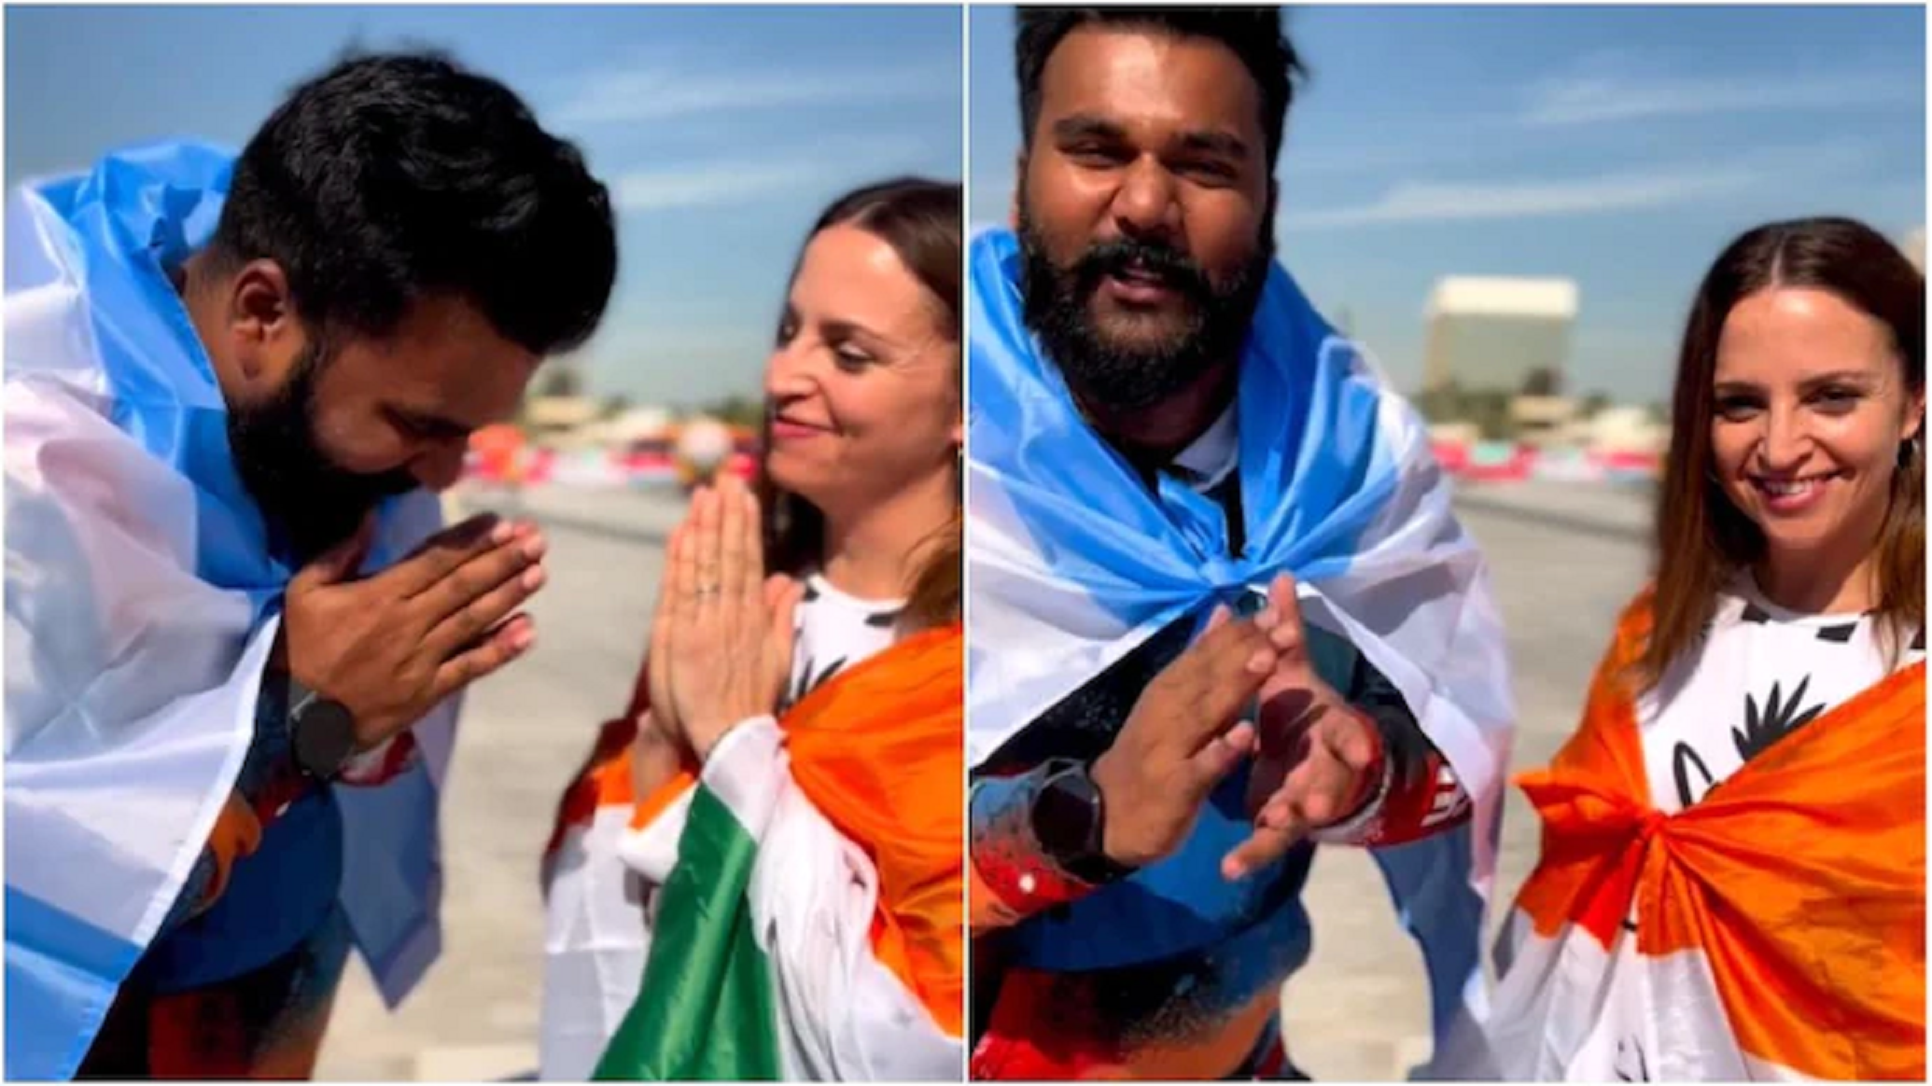 Watch : This Woman From Argentina Wears India’s Tricolor at FIFA World Cup, Calls It A Tribute